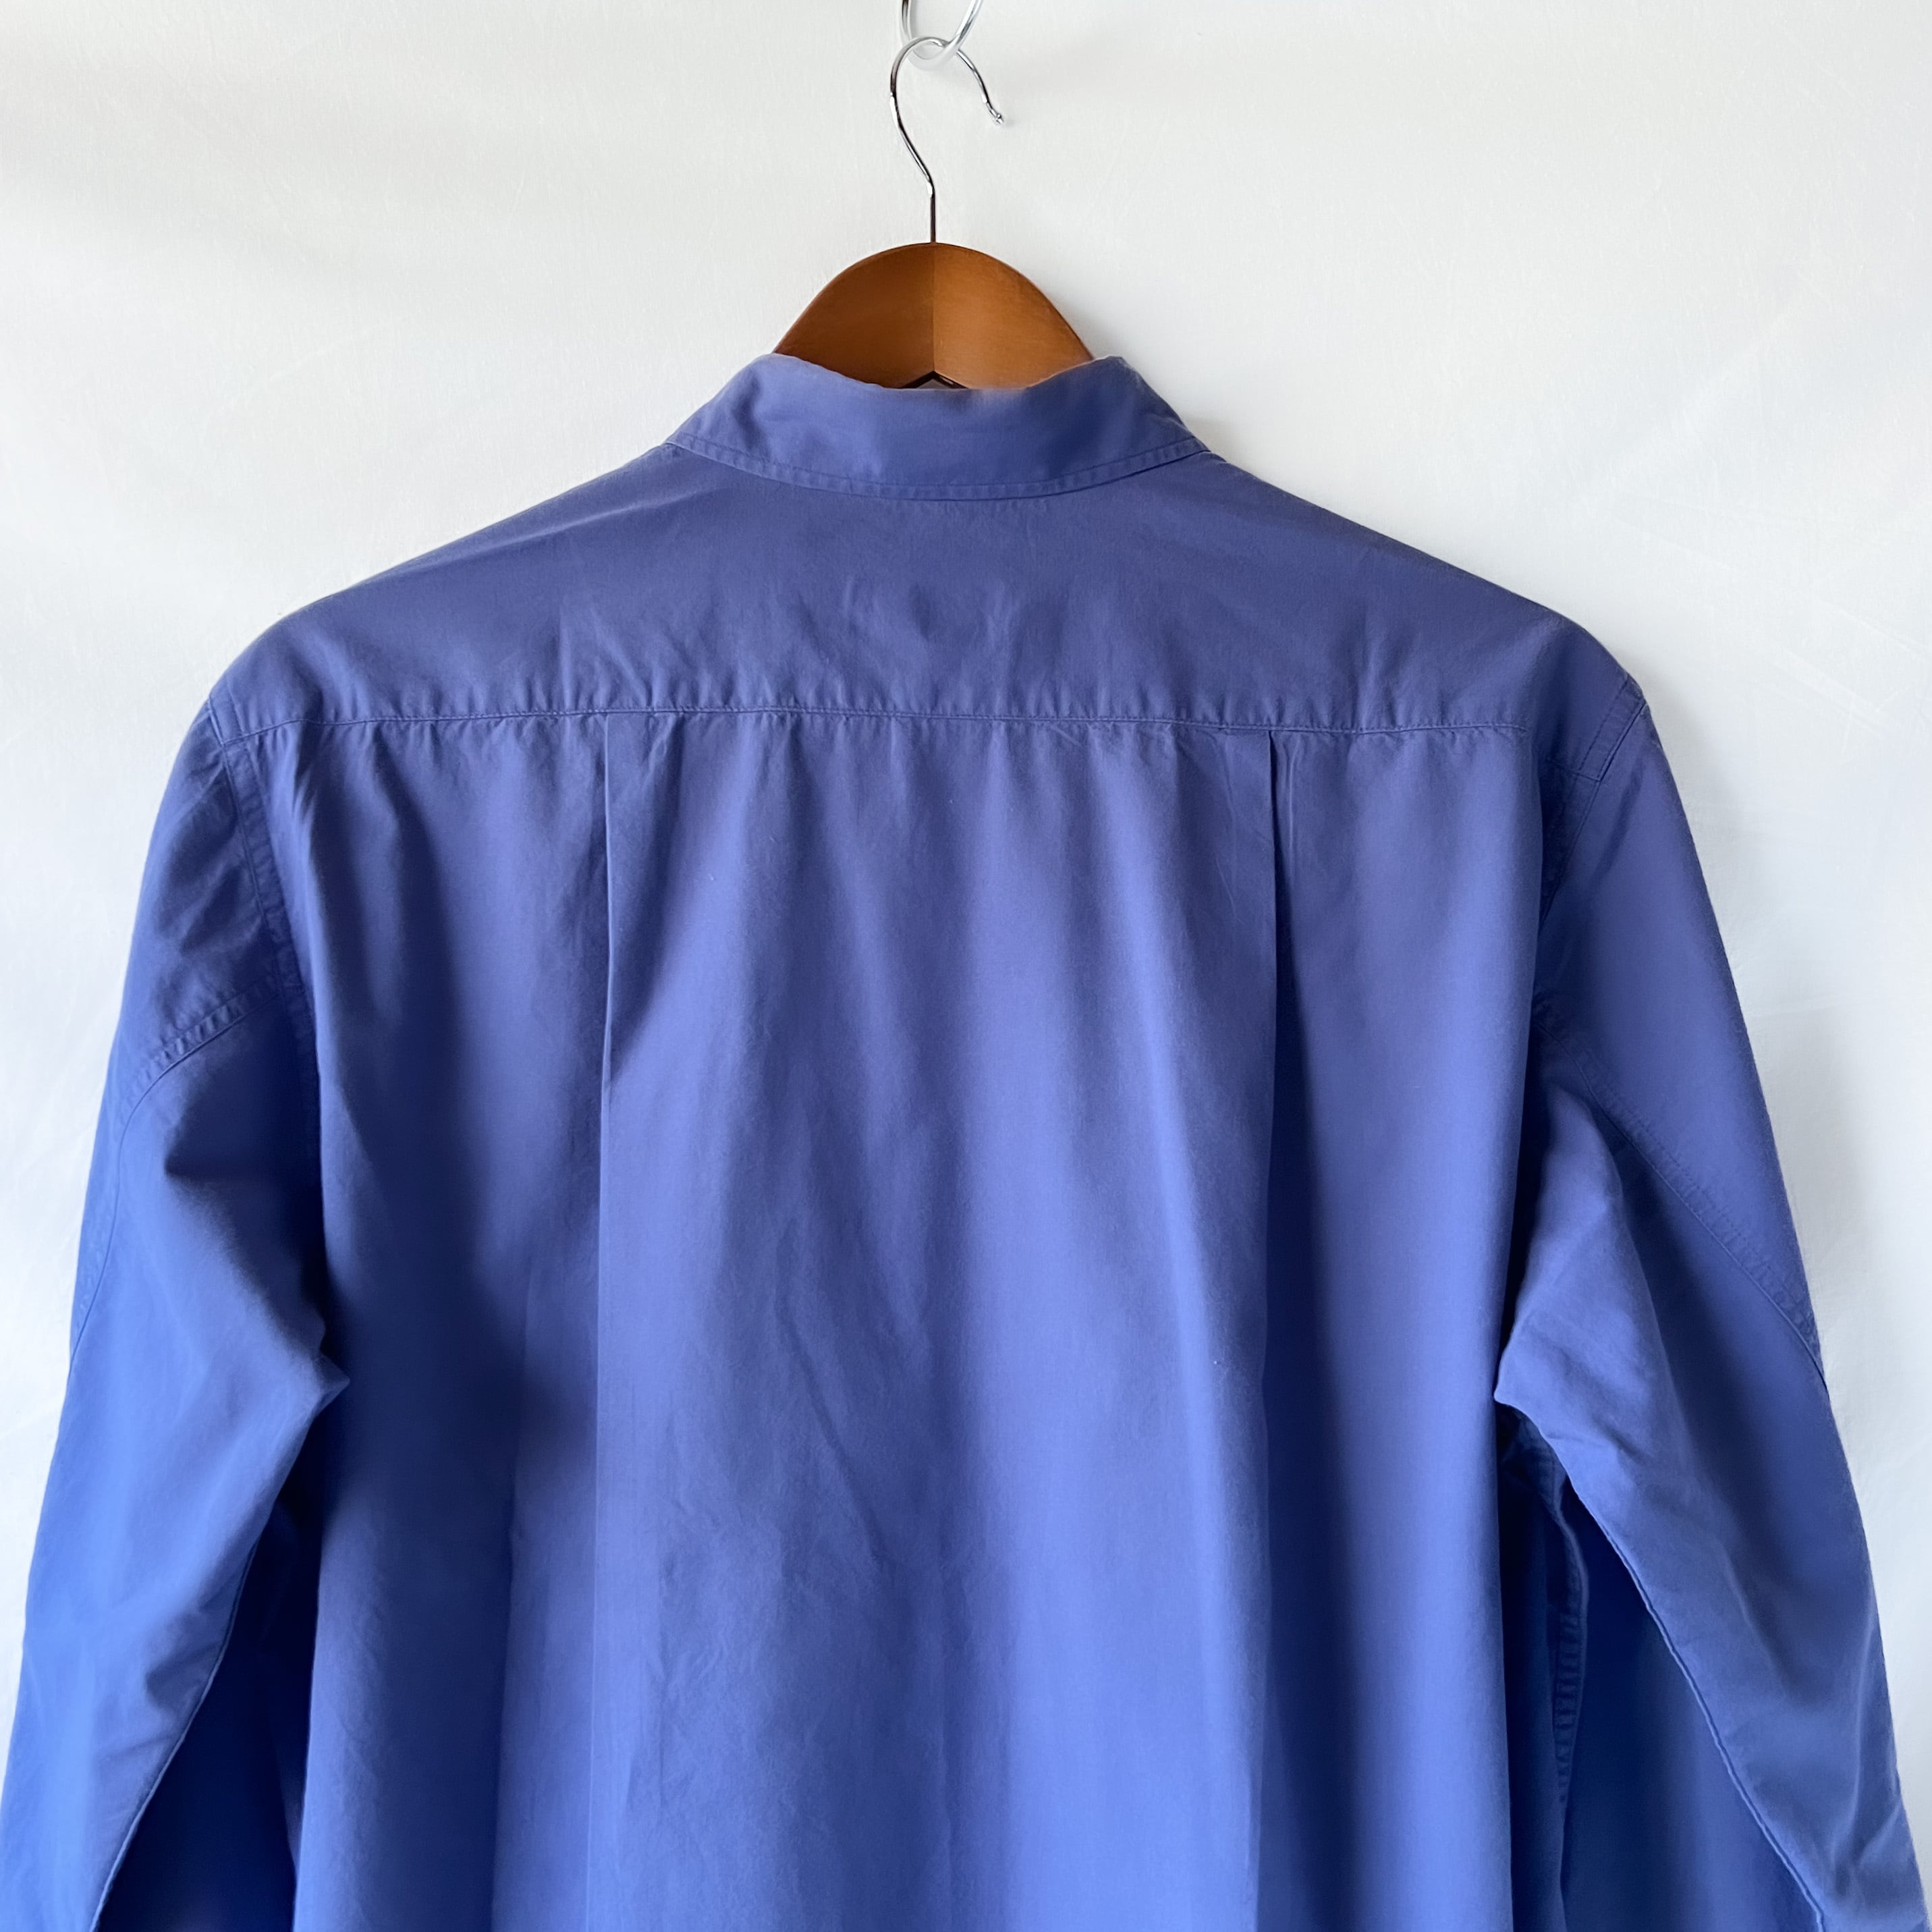 s “agnes b.” made in France french color shirt 年代